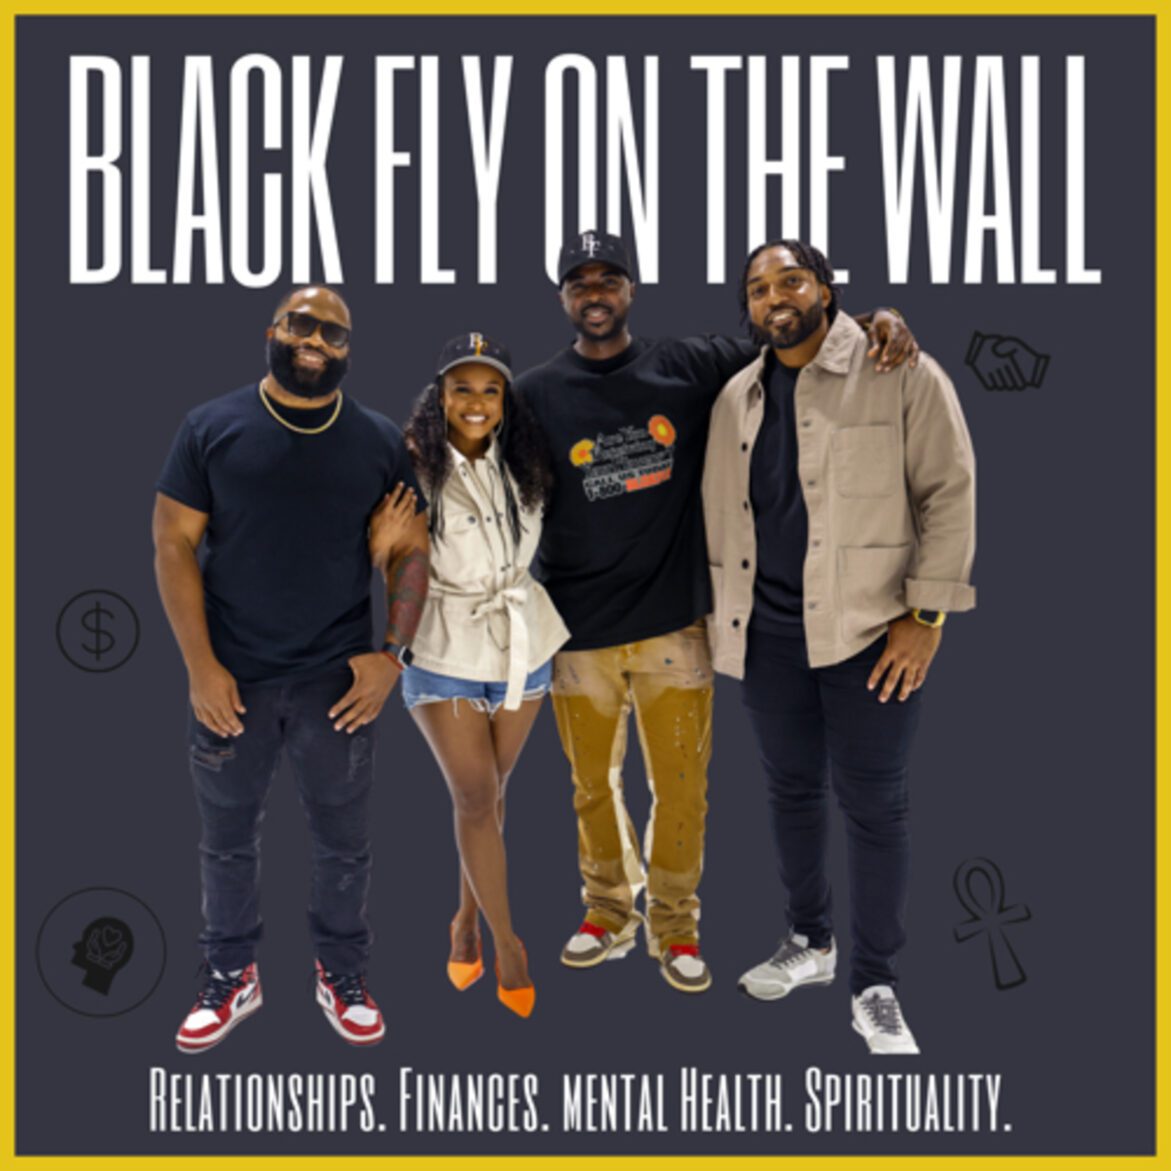 Black Podcasting - Ep 73: Why Men Hesitate To Say “I Love You” To Each Other | Black Fly on the Wall Podcast